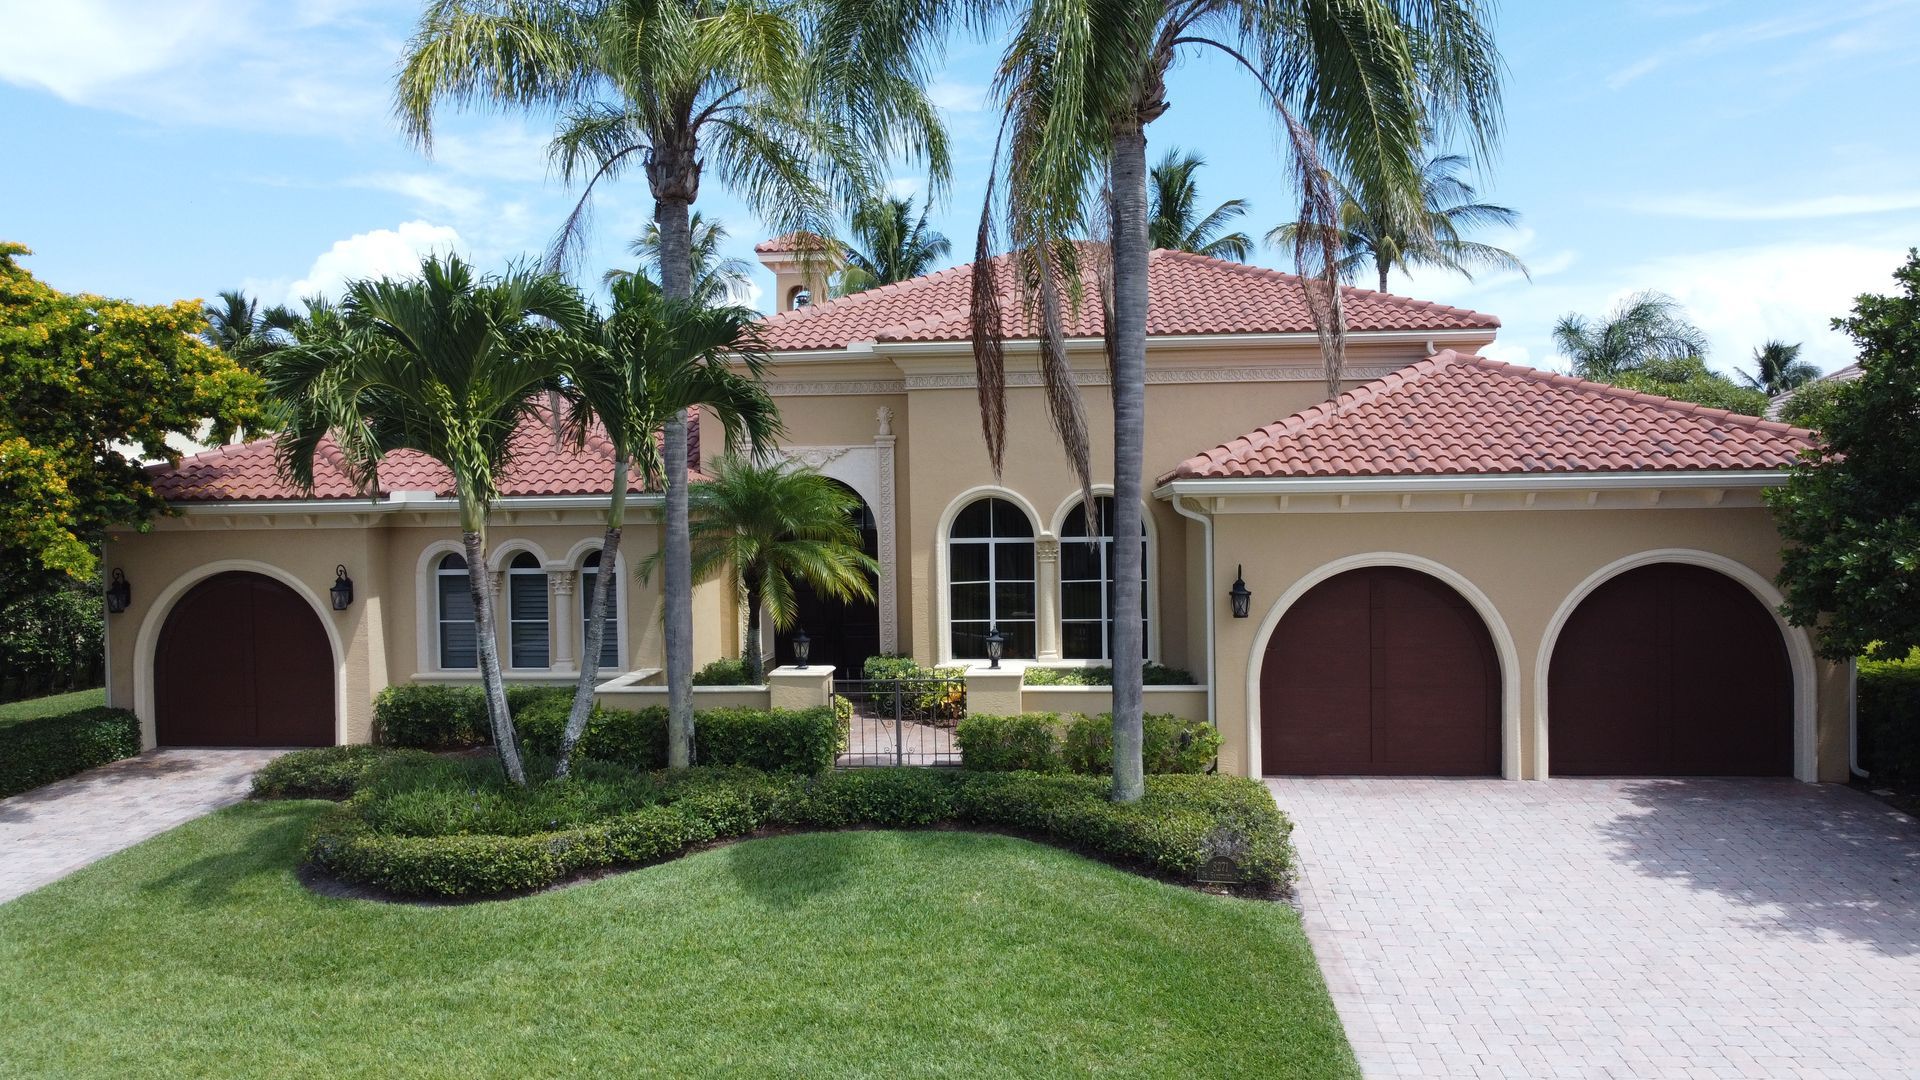 A large house with two garages and palm trees in front of it.